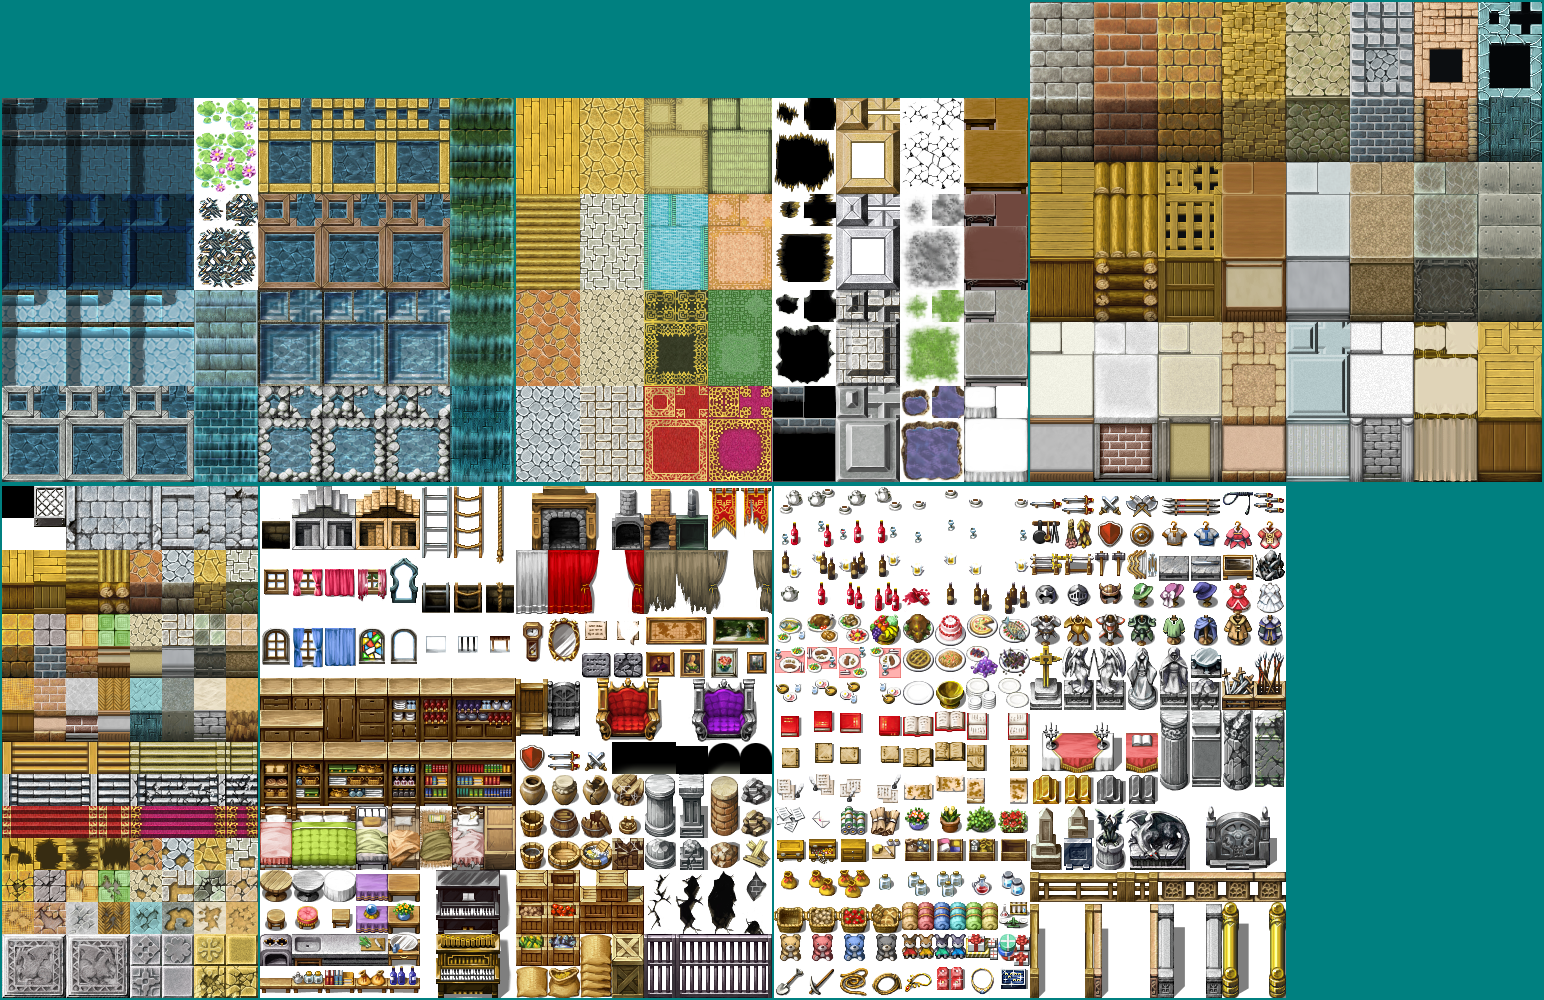 The Spriters Resource - Full Sheet View - RPG Maker VX Ace - Inside